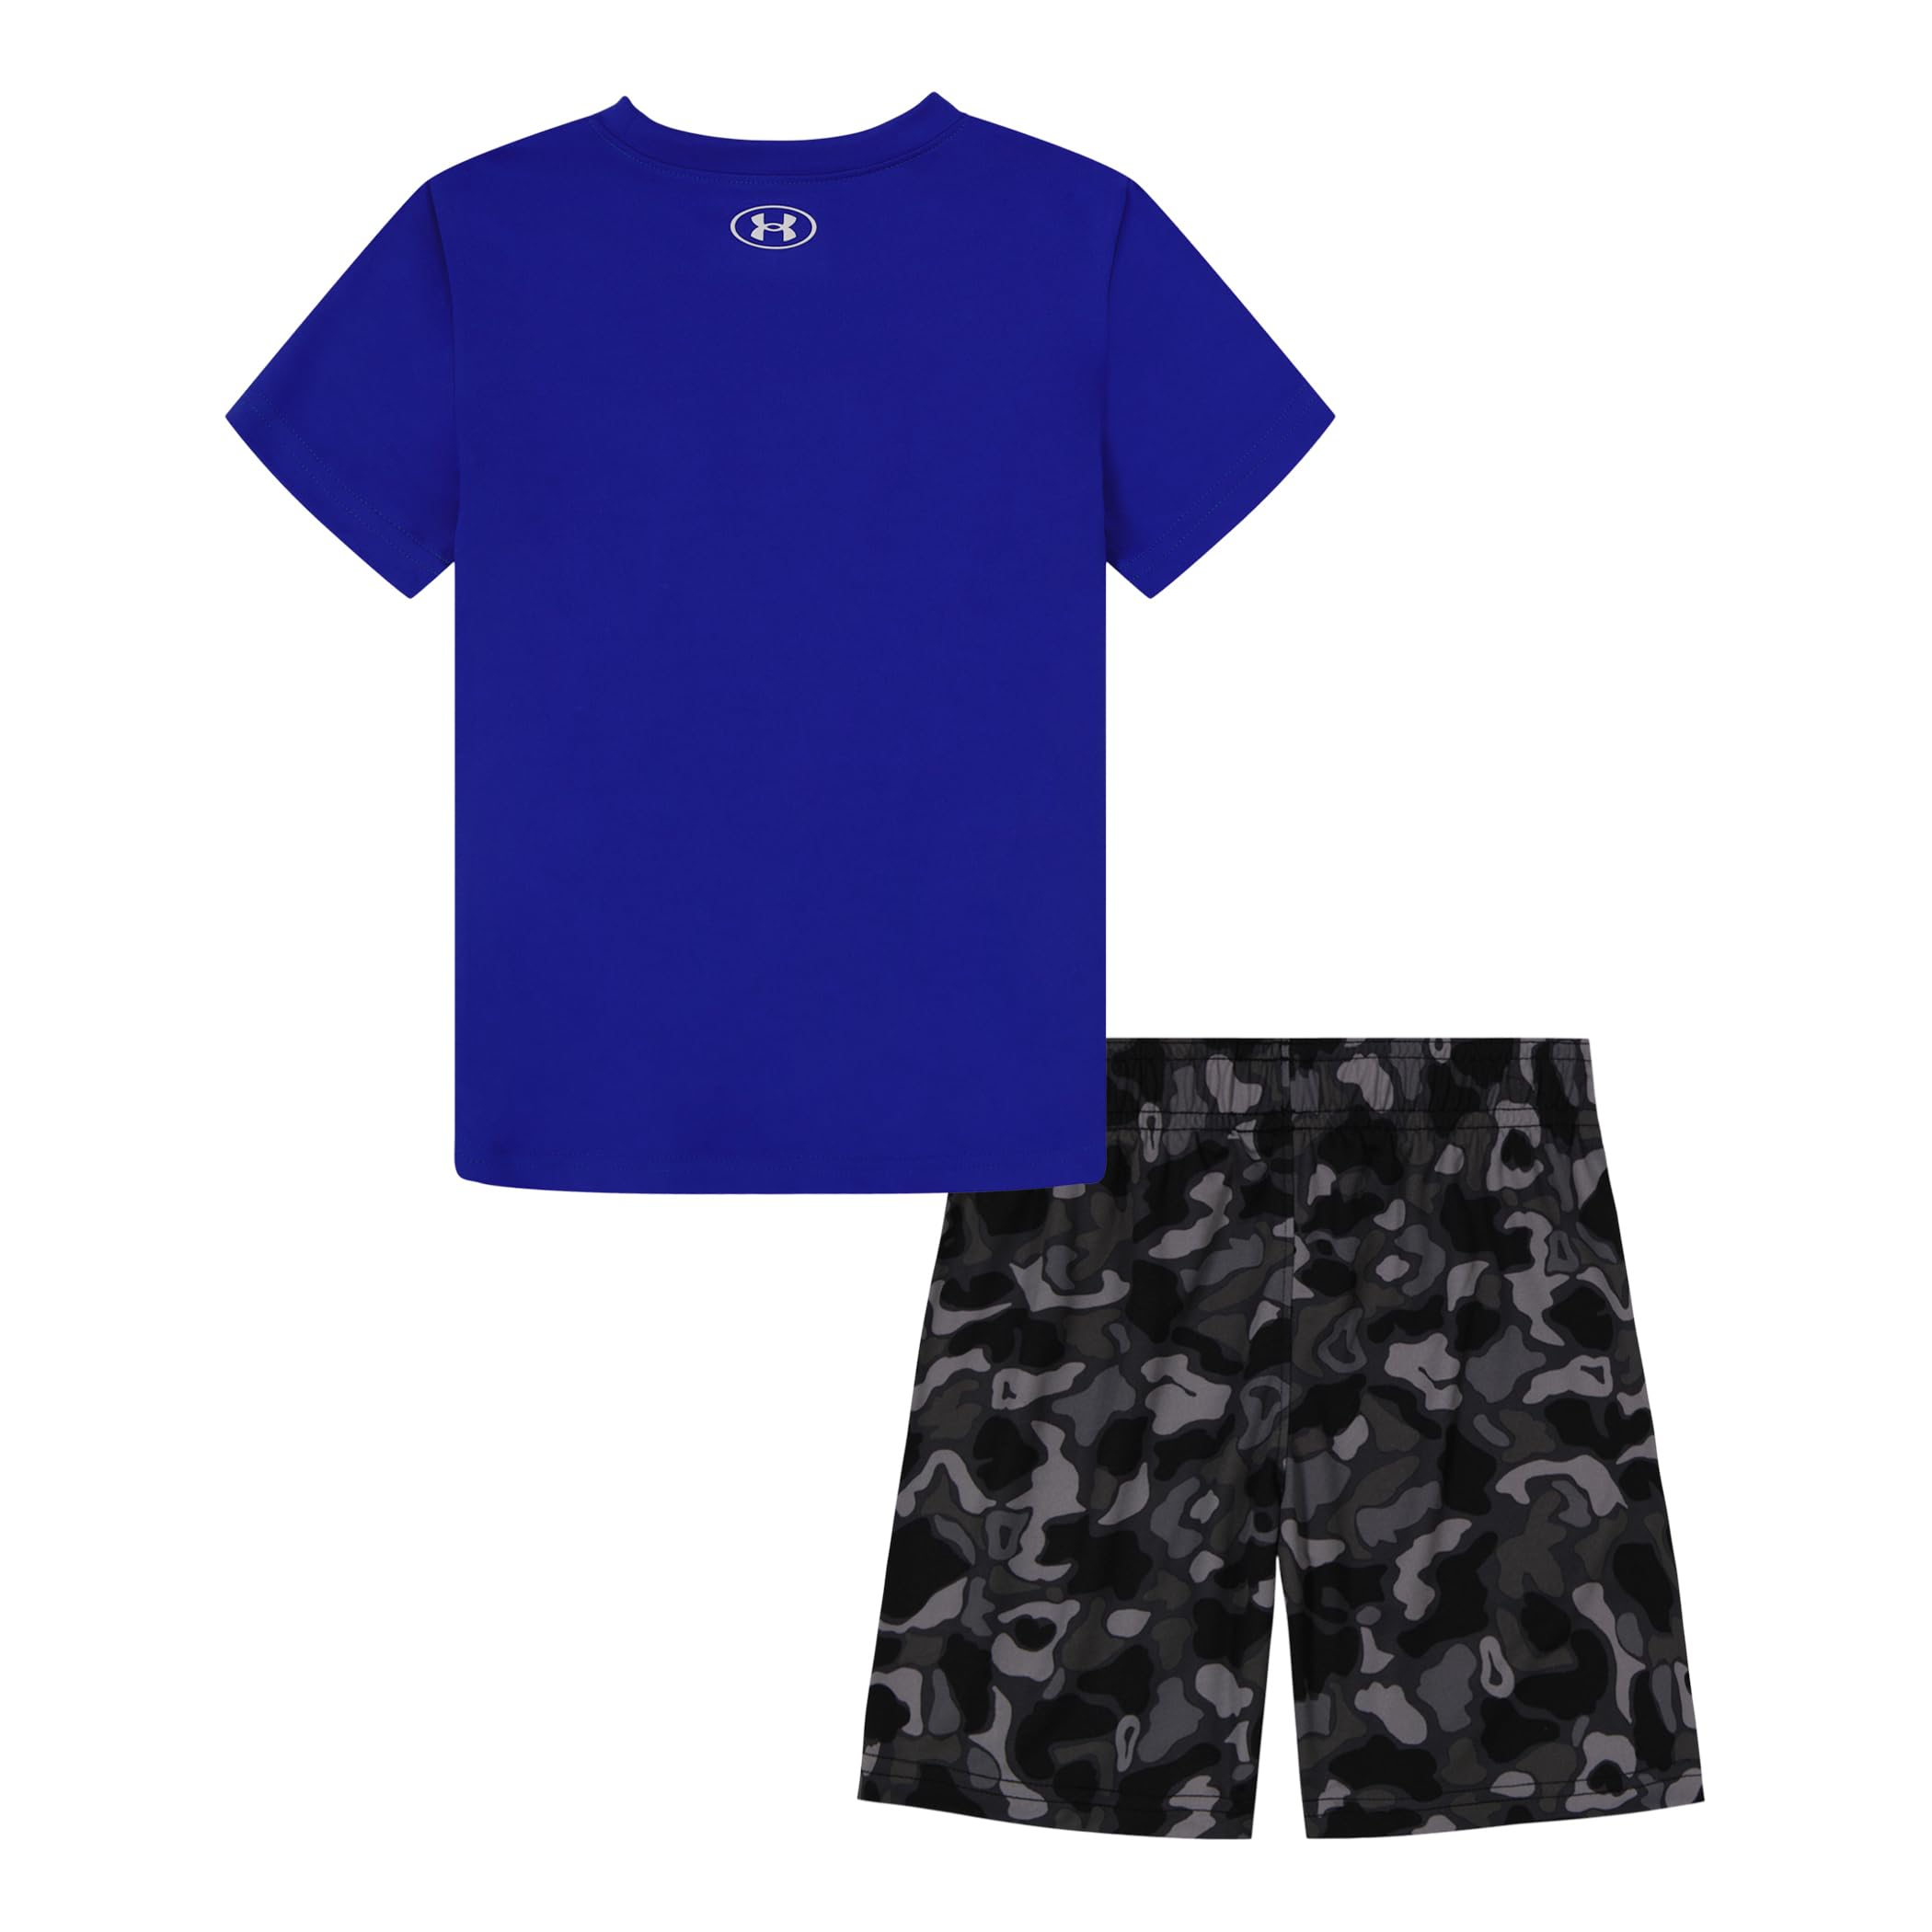 Under Armour boys Short Sleeve Tee and Short Set, Lightweight and Breathable